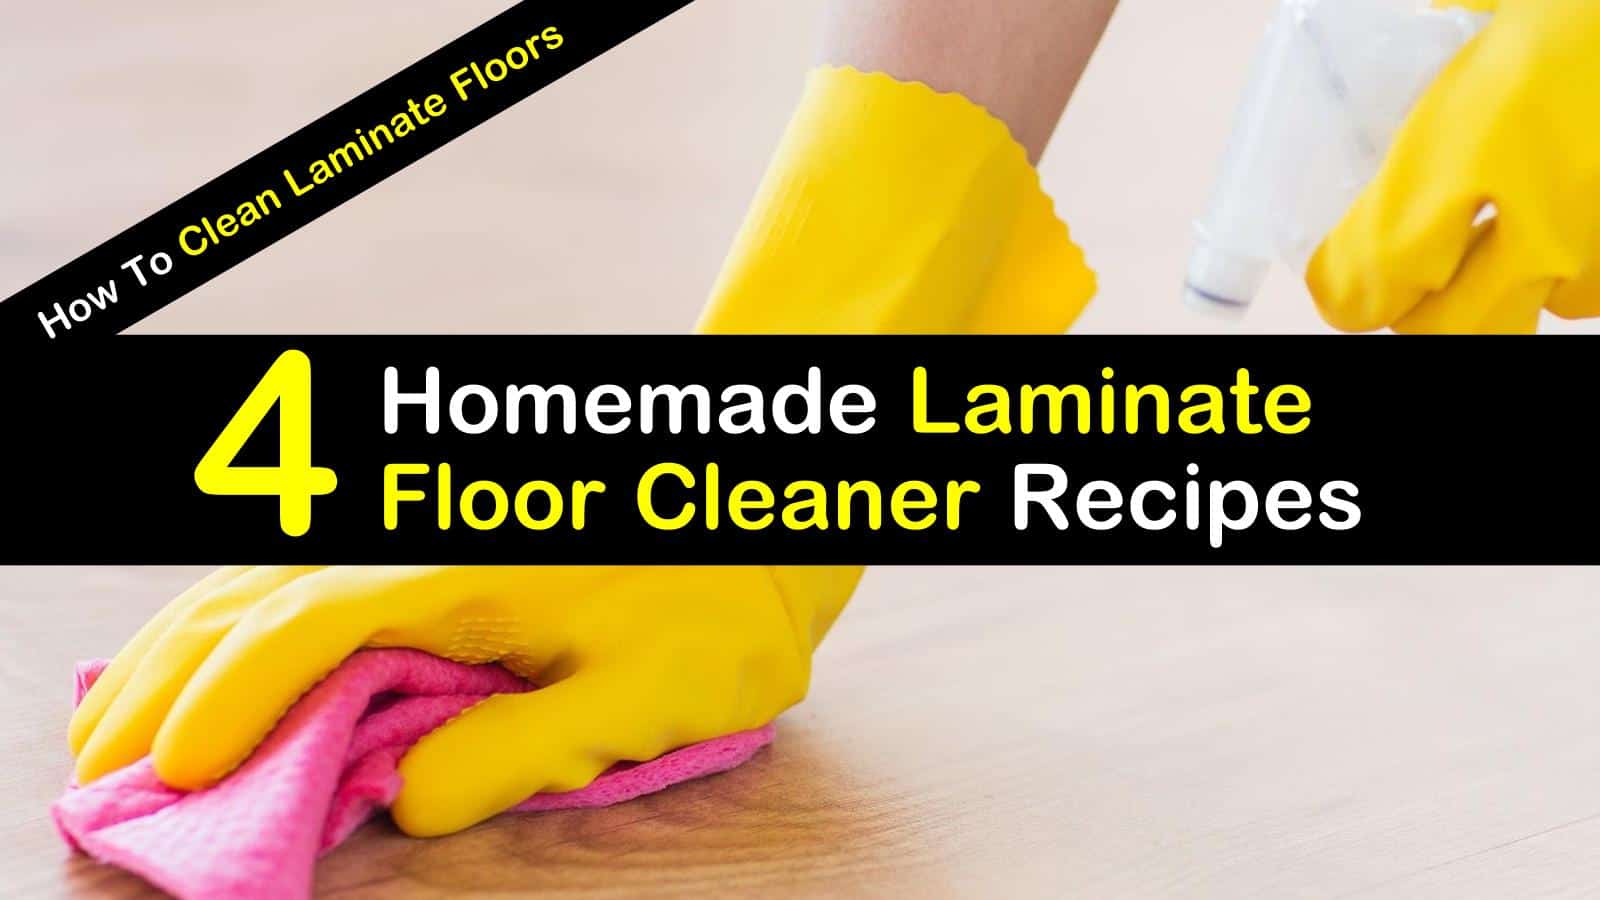 How To Clean Laminate Floors 4, How Do You Clean Laminate Floors Naturally